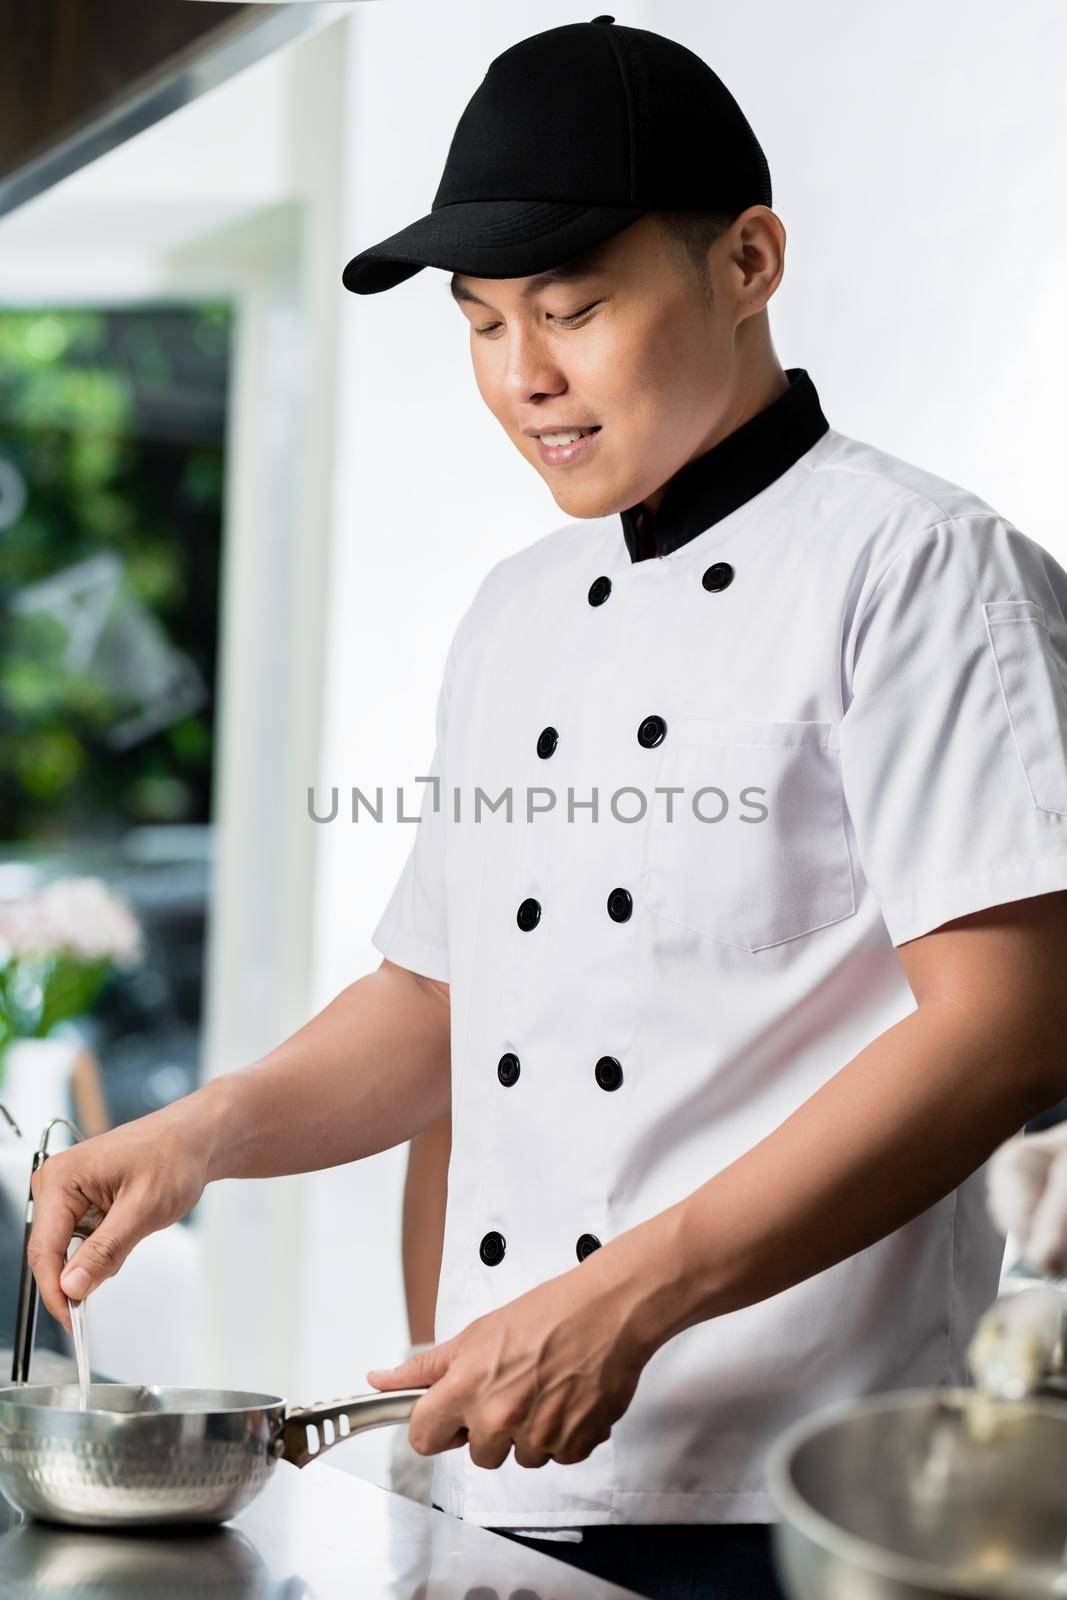 Chef cooking in a commercial kitchen by Kzenon